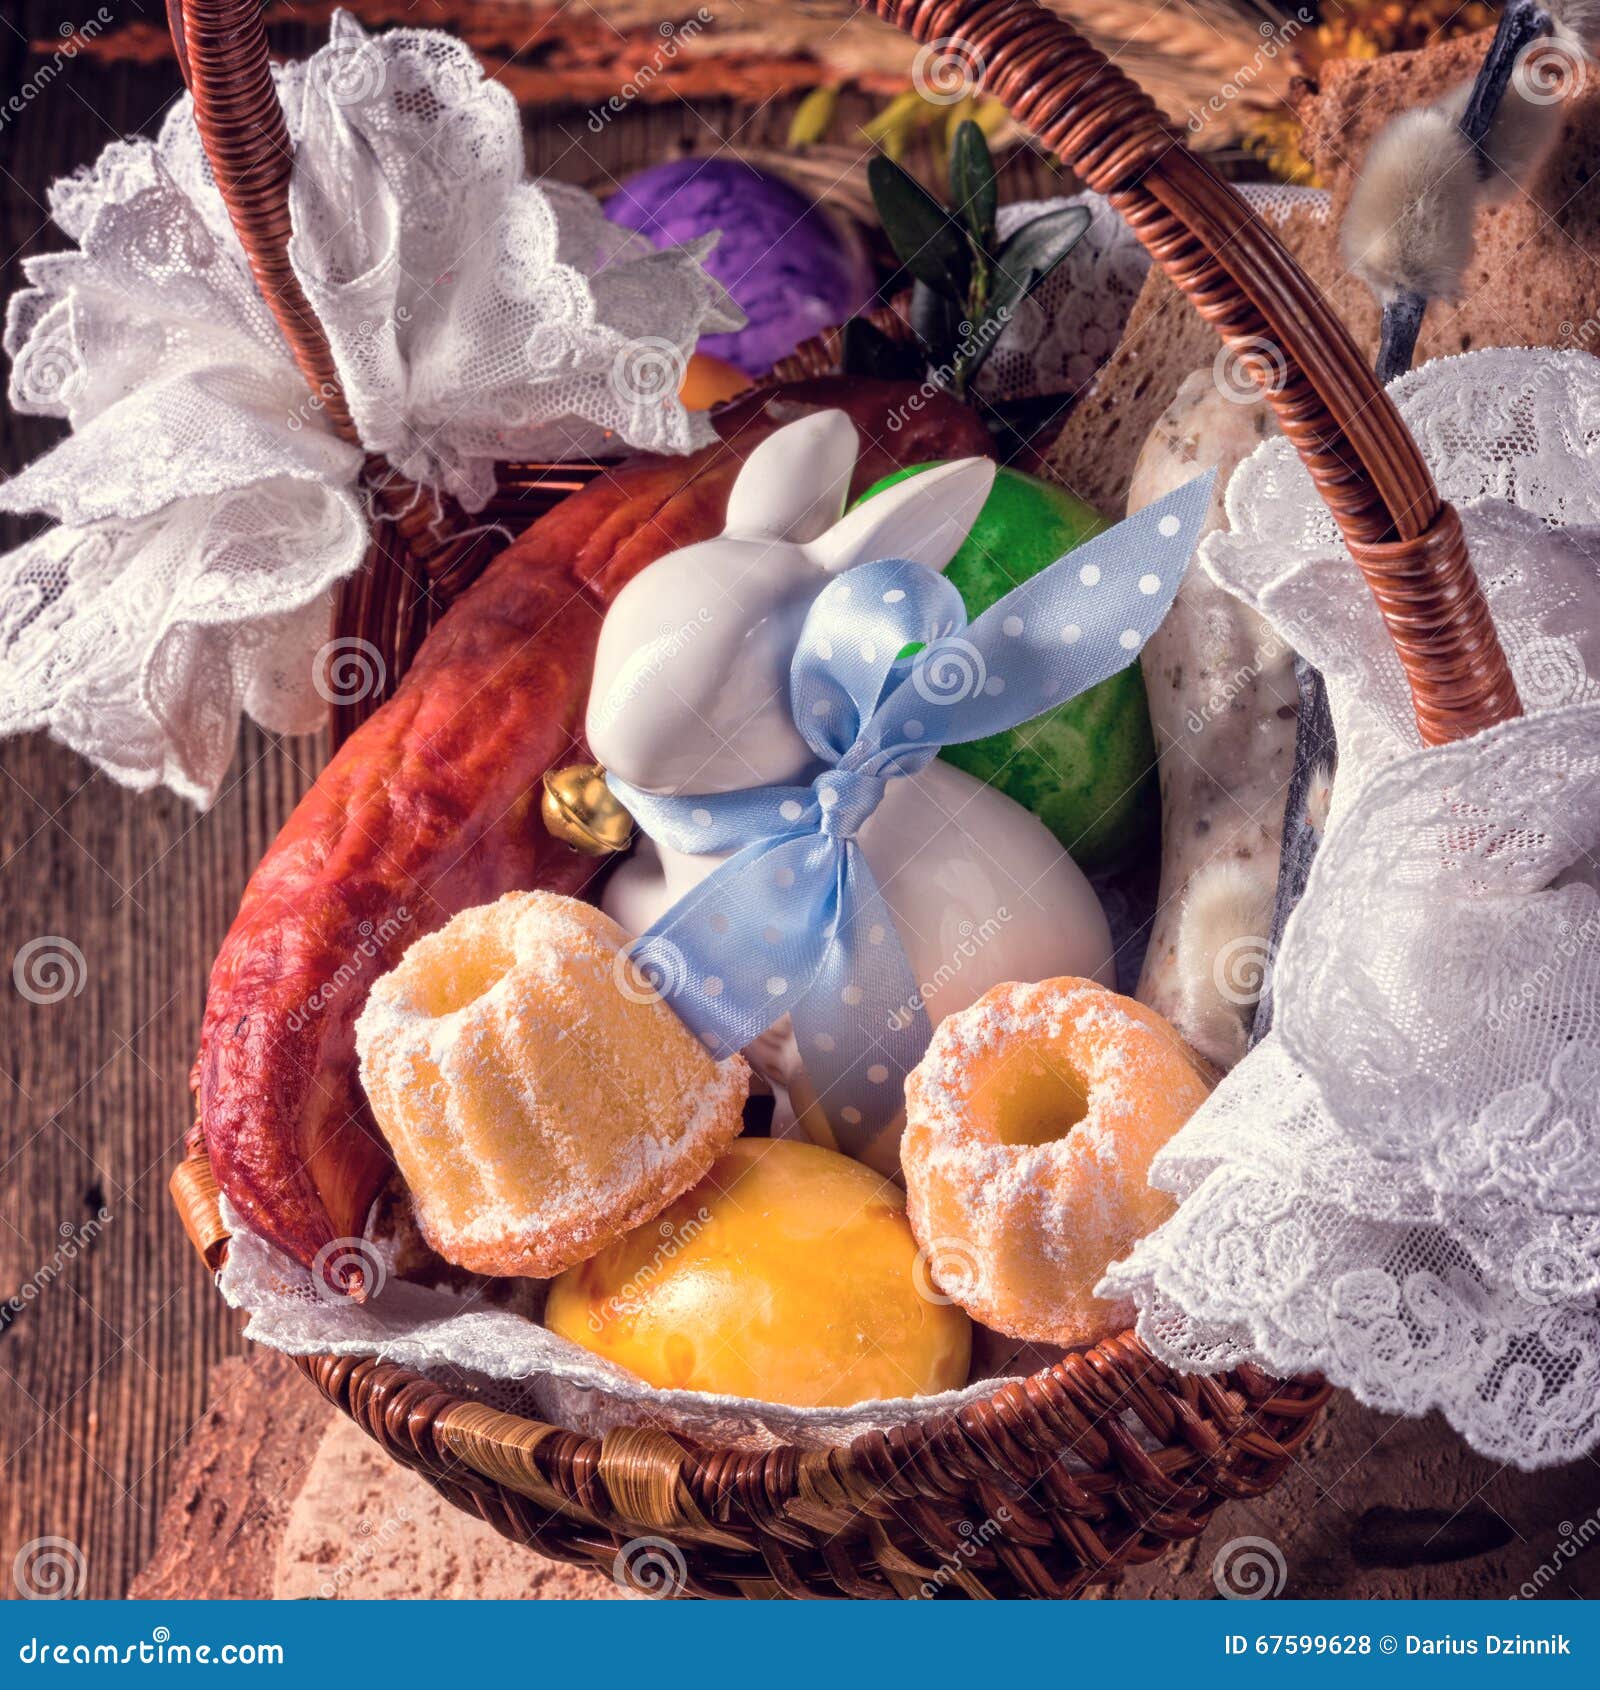 A Traditional Easter basket with food